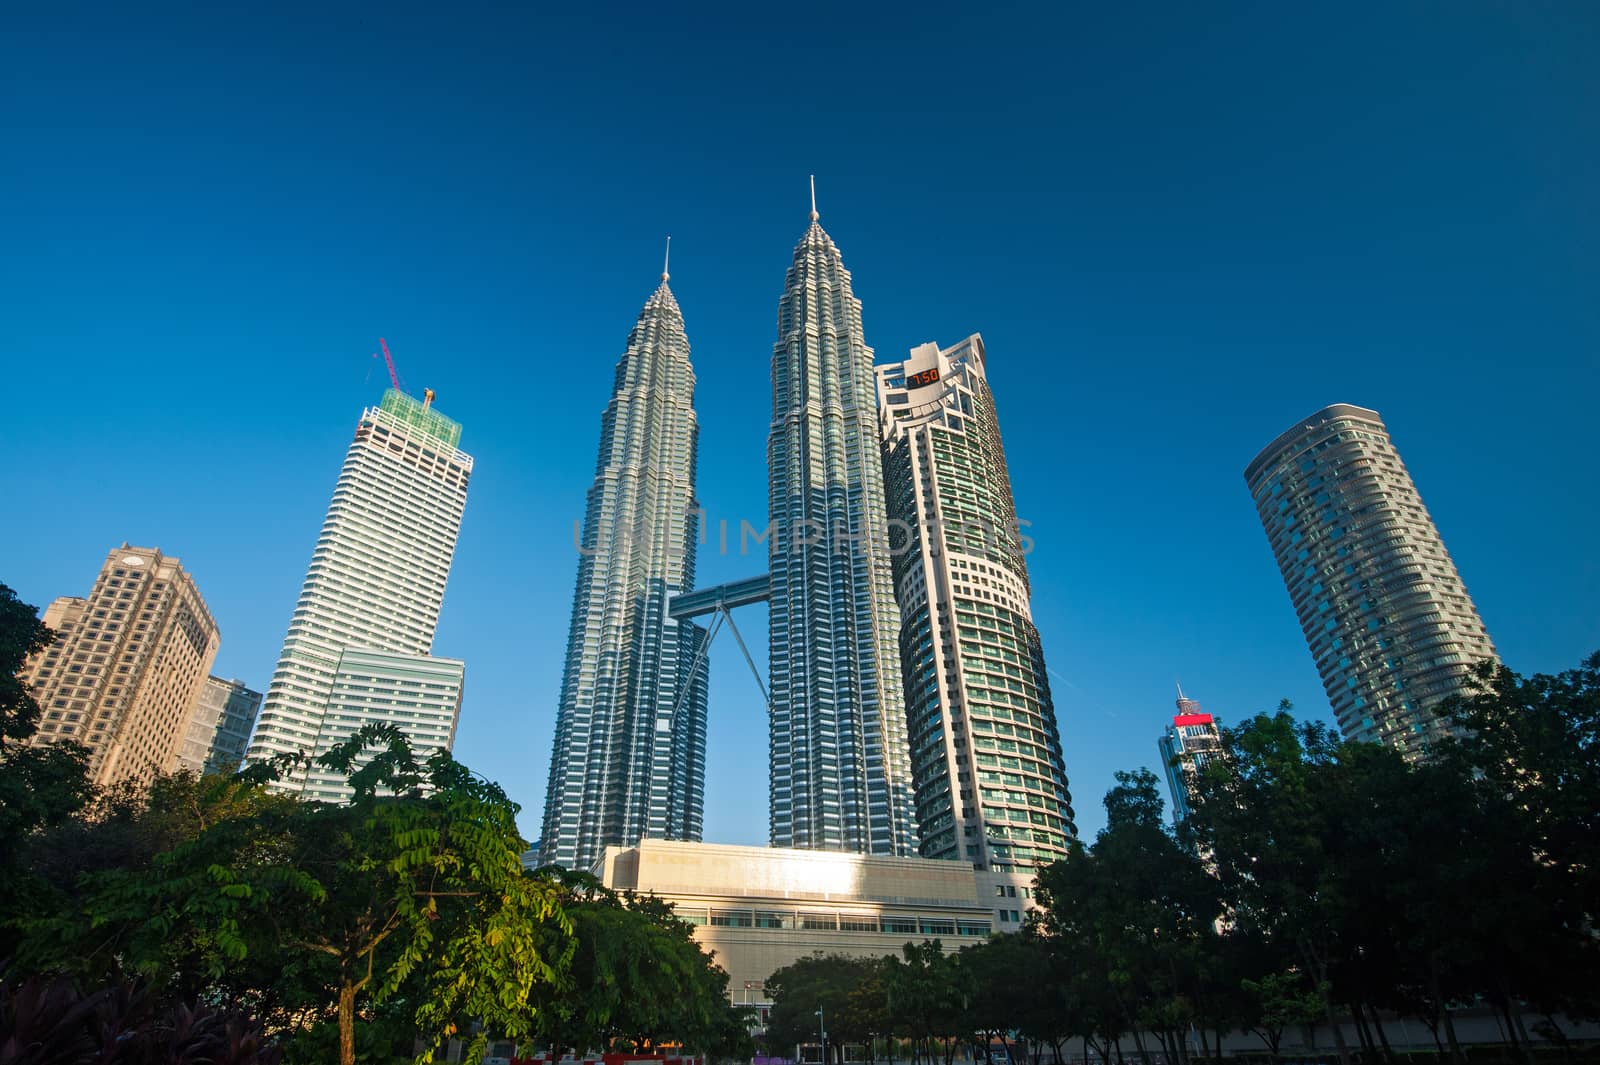 Petronas Twin Towers in Malaysia by think4photop